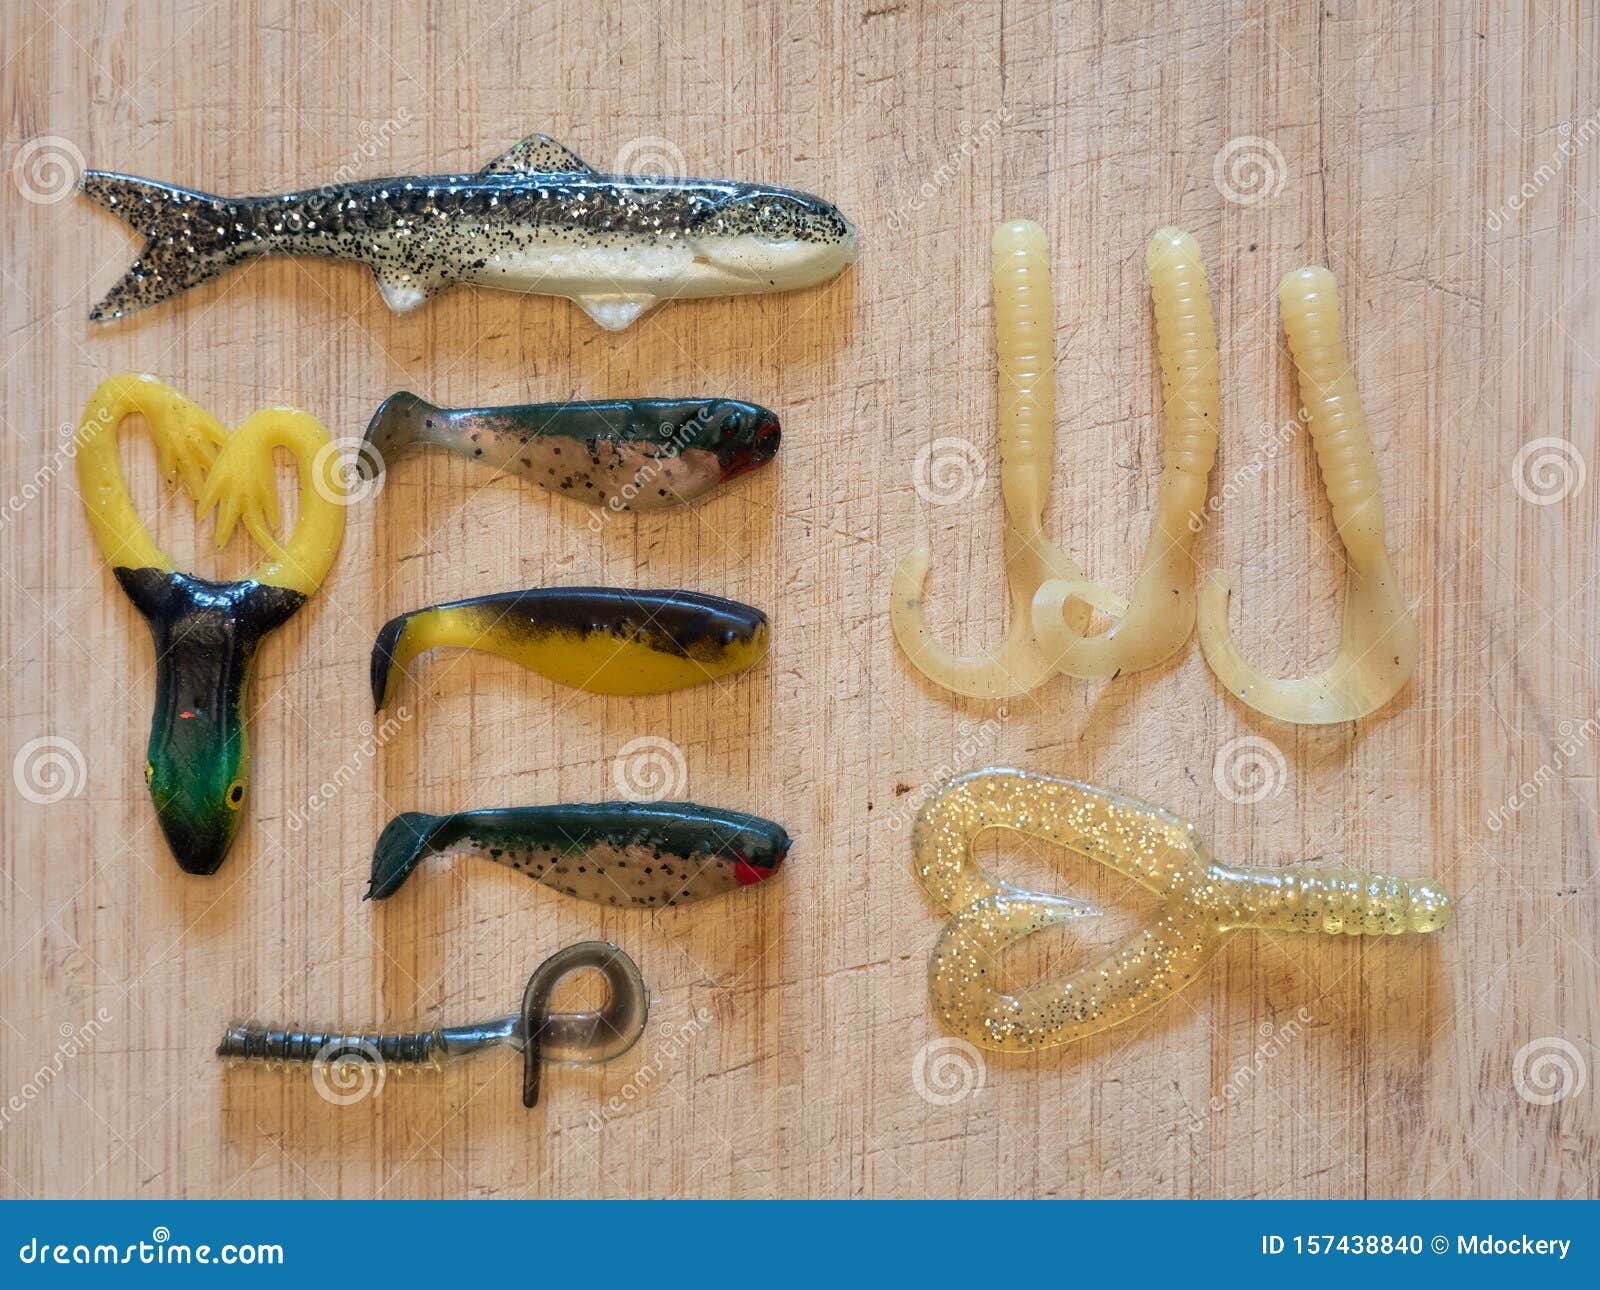 https://thumbs.dreamstime.com/z/group-rubber-fishing-lures-variety-different-artificial-157438840.jpg